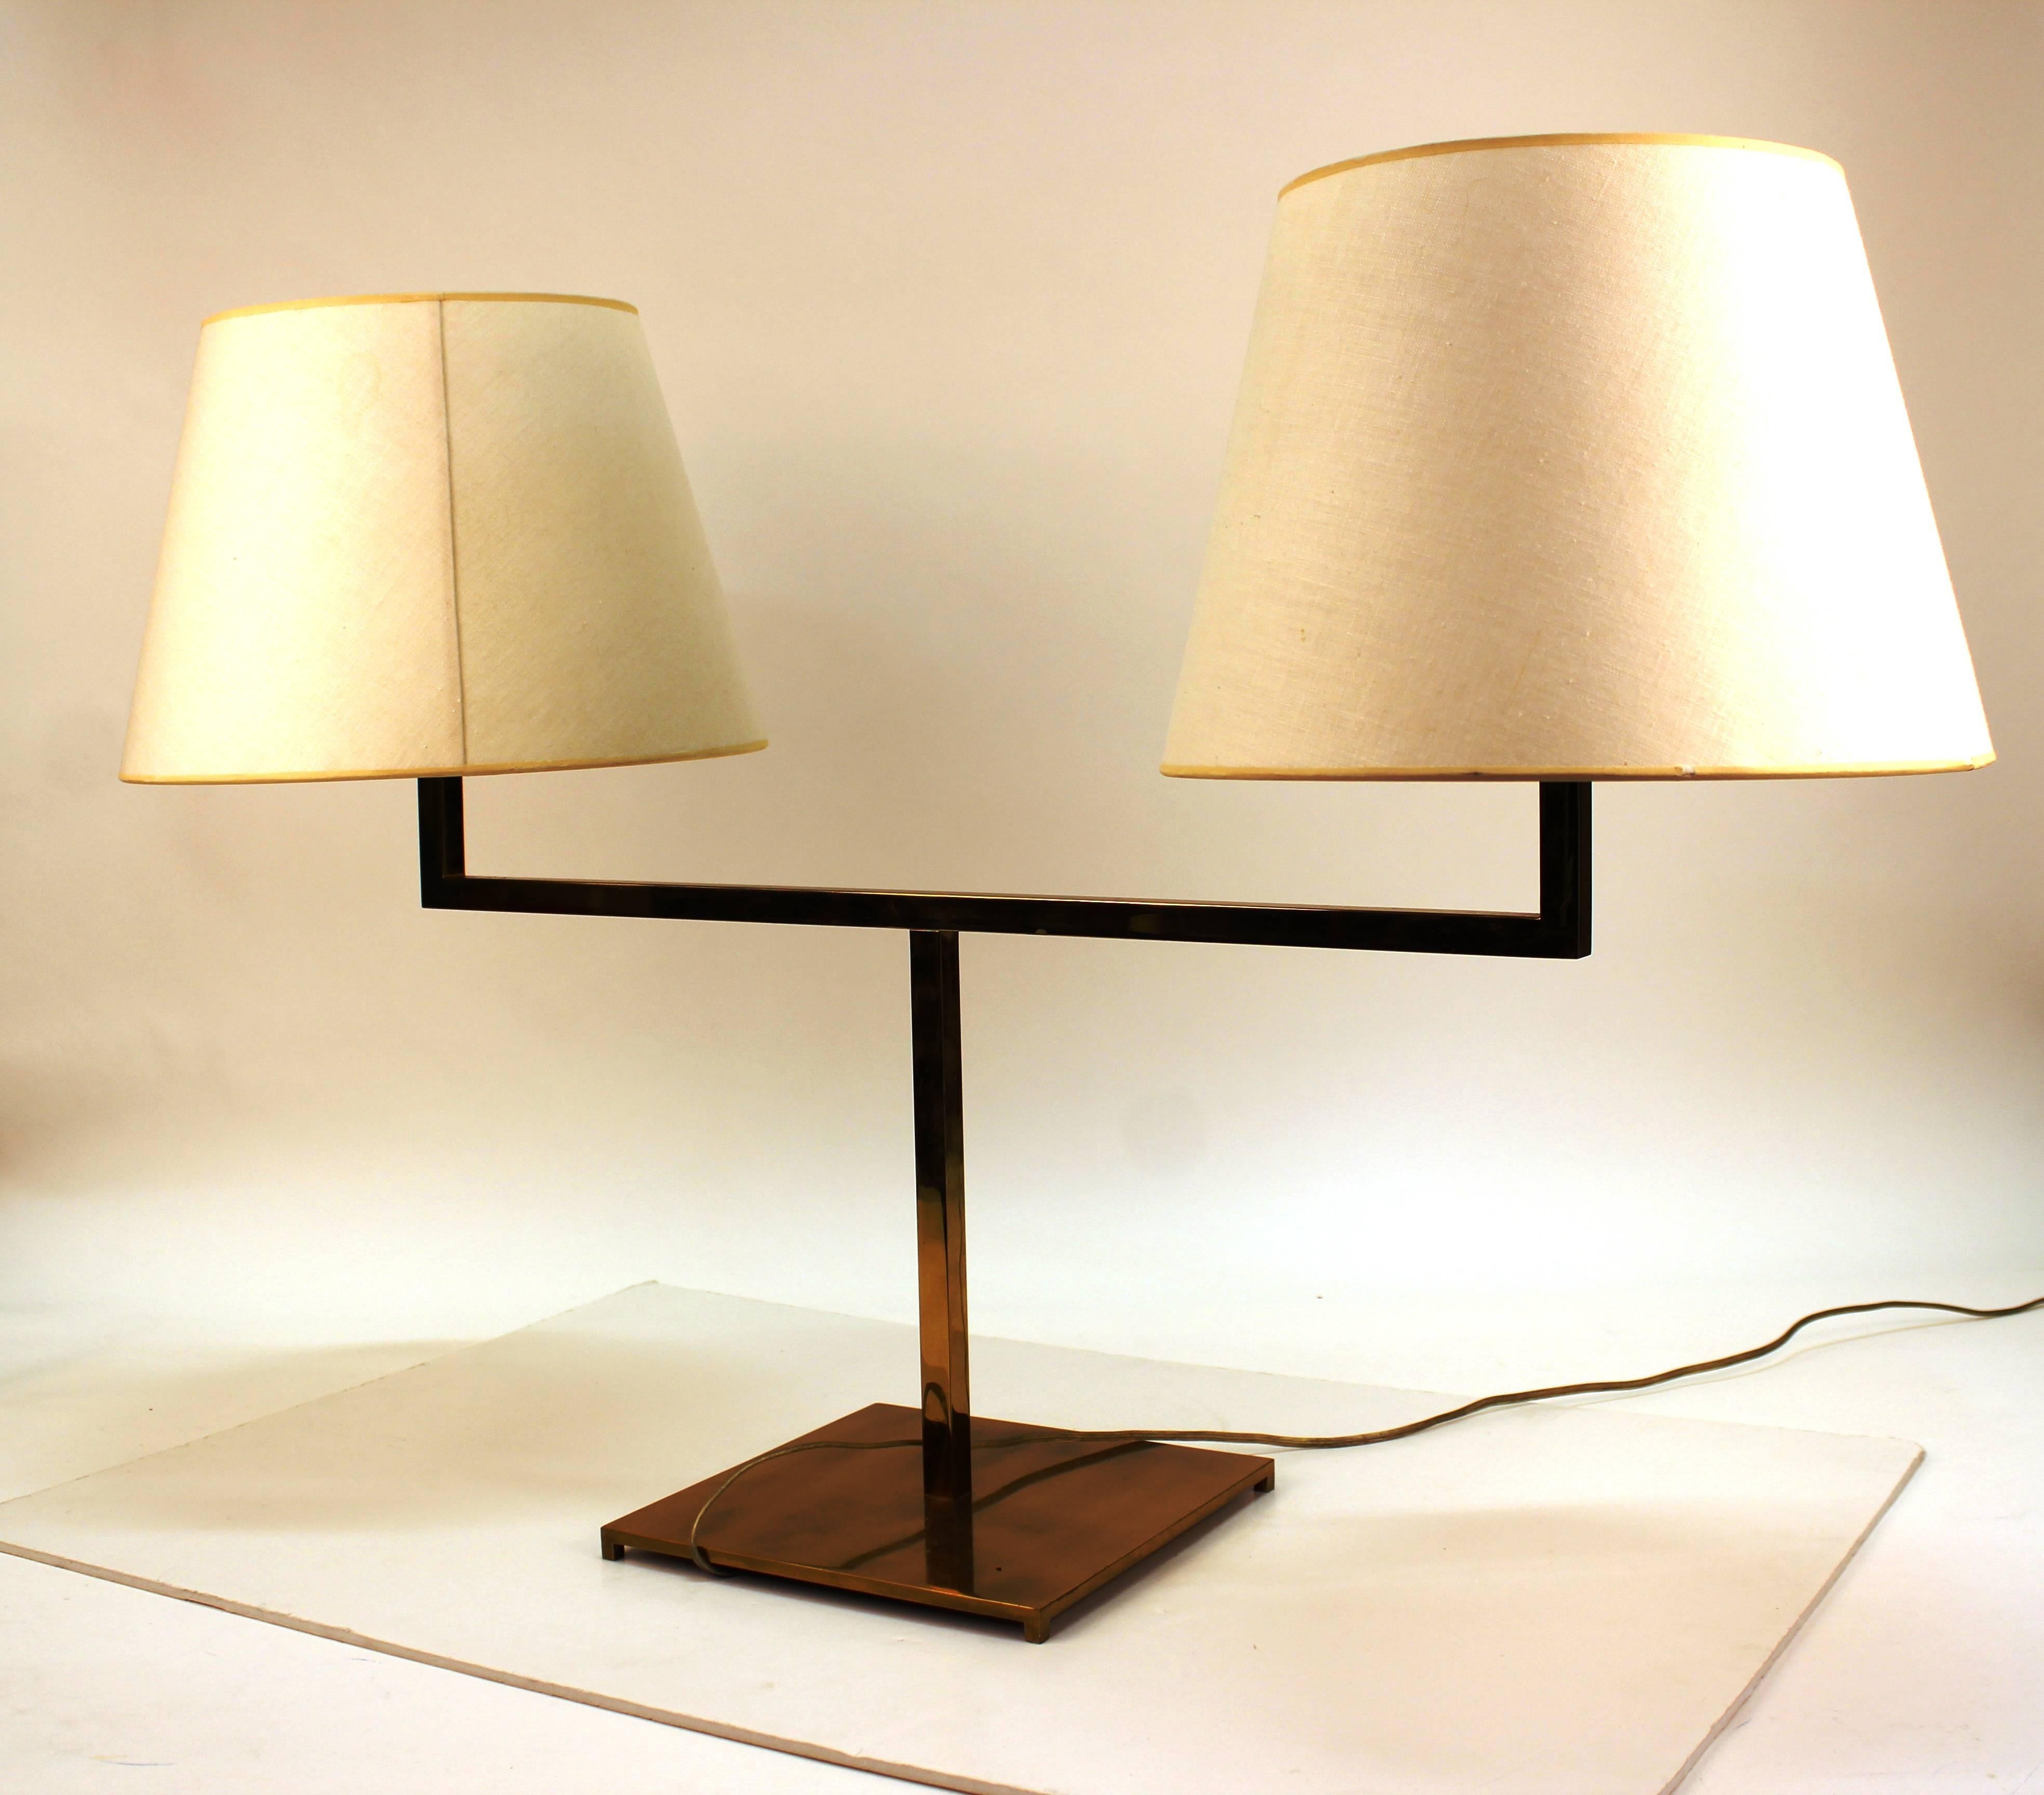 Hansen desk lamp in brass with rare double light. The piece stands on a square brass base and narrow neck with two arms. Each arm has two sockets and a pull chain. The lamp comes with the original shades, one with a small stain. Includes the maker's